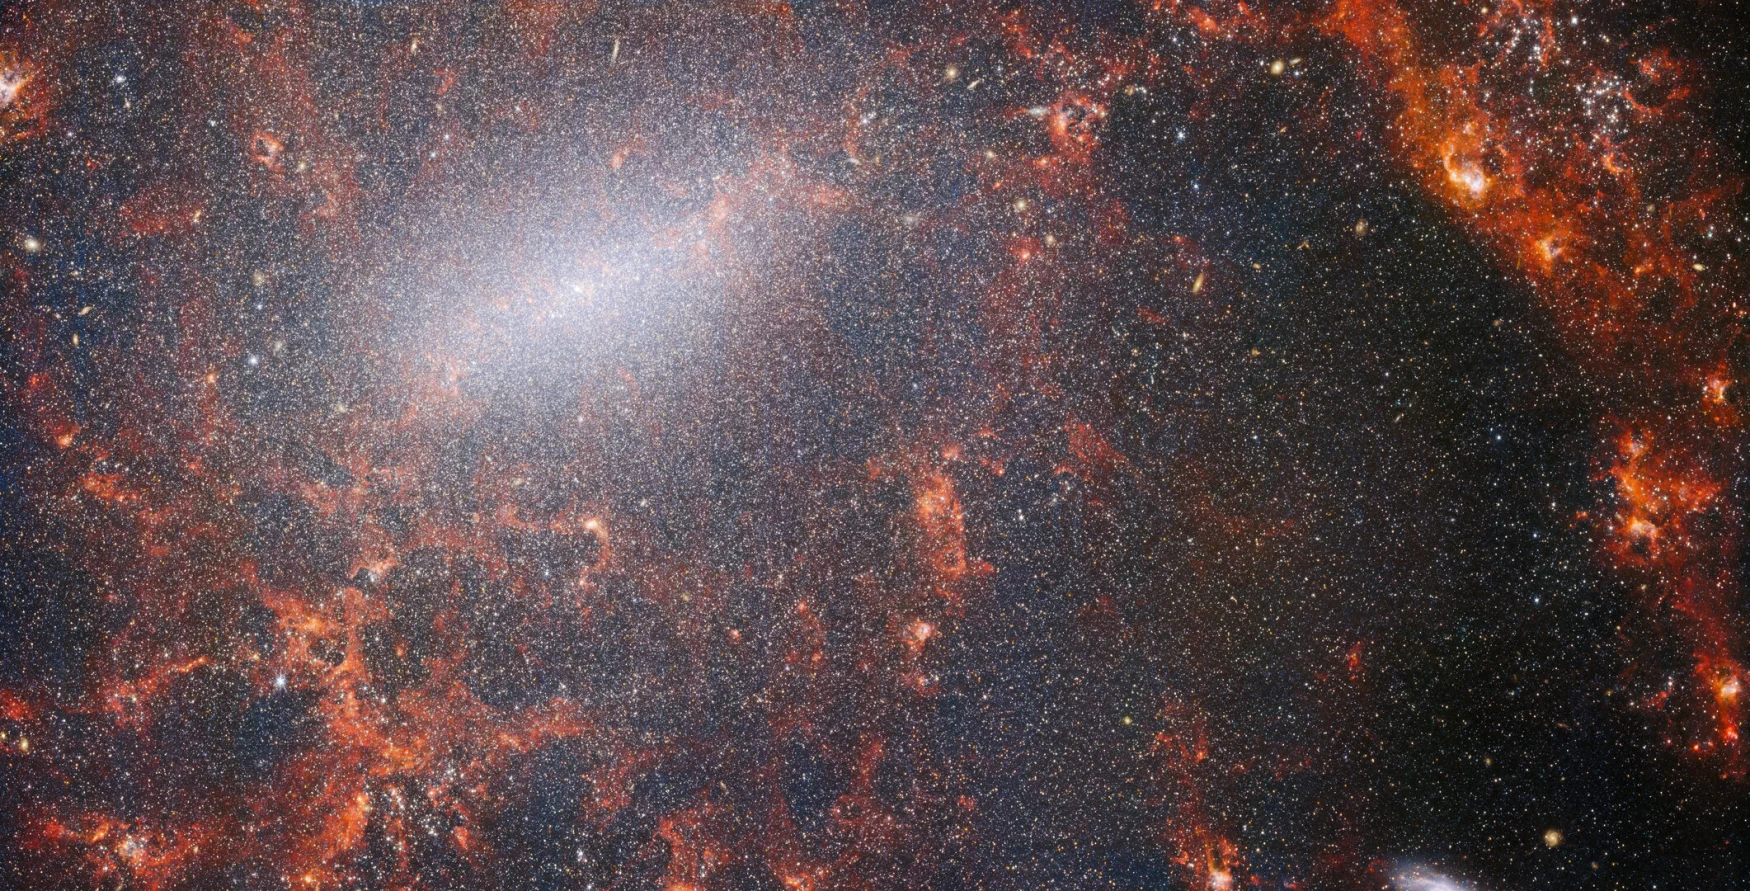 A delicate trail of dust and bright star clusters in this image from the NASA/ESA/CSA James Webb Space Telescope.  This view from Webb's NIRCam instrument studies the galaxy's massive star population, densest along its bright central bar, with fiery red gas clouds illuminated by young stars inside.  These twinkling stars belong to the barred spiral galaxy NGC 5068, located about 17 million light-years from Earth in the constellation Virgo.  This image of NGC 5068 is part of a campaign to create an astronomical treasure trove, a repository of observations of star formation in nearby galaxies.  Previous gems from this collection can be found here and here.  These observations are especially valuable to astronomers for two reasons.  The first is because star formation underpins many fields of astronomy, from the physics of the tiny plasma that lies between stars to the evolution of entire galaxies.  By observing the formation of stars in nearby galaxies, astronomers hope to initiate major scientific advances with some of the first available data from Webb.  The second reason is that Webb's observations build on other studies using telescopes including the NASA/ESA Hubble Space Telescope and some of the world's most capable ground-based observatories.  Webb collected images of 19 nearby star-forming galaxies that astronomers could then combine with Hubble's catalogs of 10,000 star clusters, spectroscopic mapping of 20Â 000 star-forming emission nebulae from the Very Large Telescope ( VLT), and observations of 12Â 000 dark.  , a dense molecular cloud identified by the Atacama Large Millimeter/submillimeter Array (ALMA).  These observations span the electromagnetic spectrum and give astronomers an unprecedented opportunity to piece together the minutiae of star formation.  This near-infrared image of the galaxy is filled with the massive cluster of ancient stars that make up the core of NGC 5068. NIRCam's sharp vision allows astronomers to peer into the galaxy's gas and dust to examine fix its stars.  Dense and bright clouds of dust are in the path of the spiral arms: these are H II regions, collections of hydrogen gas where new stars are formed.  Young, energetic stars ionize the hydrogen around them which, when combined with hot dust emission, creates this red glow.  H II regions have become an interesting target for astronomers, and the Webb instruments are the perfect tool to examine them, resulting in this image. [Image Description: A close-in image of a spiral galaxy, showing its core and part of a spiral arm. At this distance thousands upon thousands of tiny stars that make up the galaxy can be seen. The stars are most dense in a whitish bar that forms the core, and less dense out from that towards the arm. Bright red gas clouds follow the twist of the galaxy and the spiral arm.] Links NGC 5068 (NIRCam+MIRI Image) NGC 5068 (MIRI Image) Slider Tool (MIRI and NIRCam images) Video: Pan sa NGC 5068 Video: Webb's views of NGC 5068 (MIRI and NIRCam images) Video: Zoom into NGC 5068 